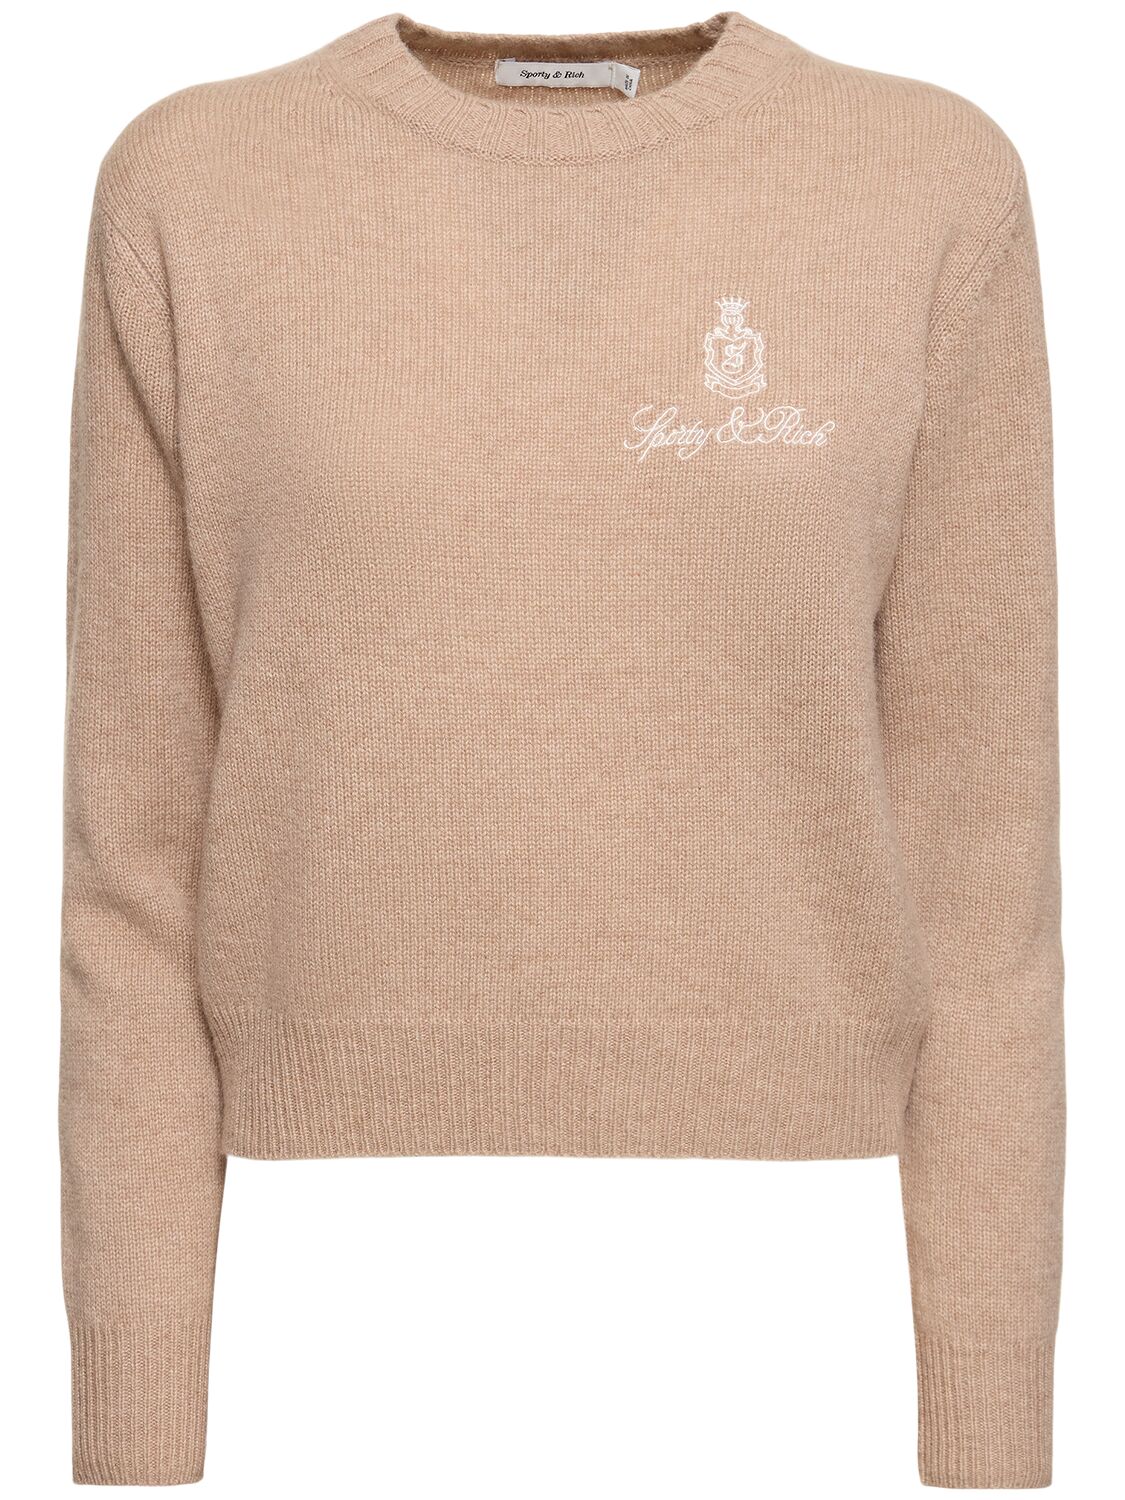 Sporty And Rich Vendome Cashmere Crewneck Sweater In Brown